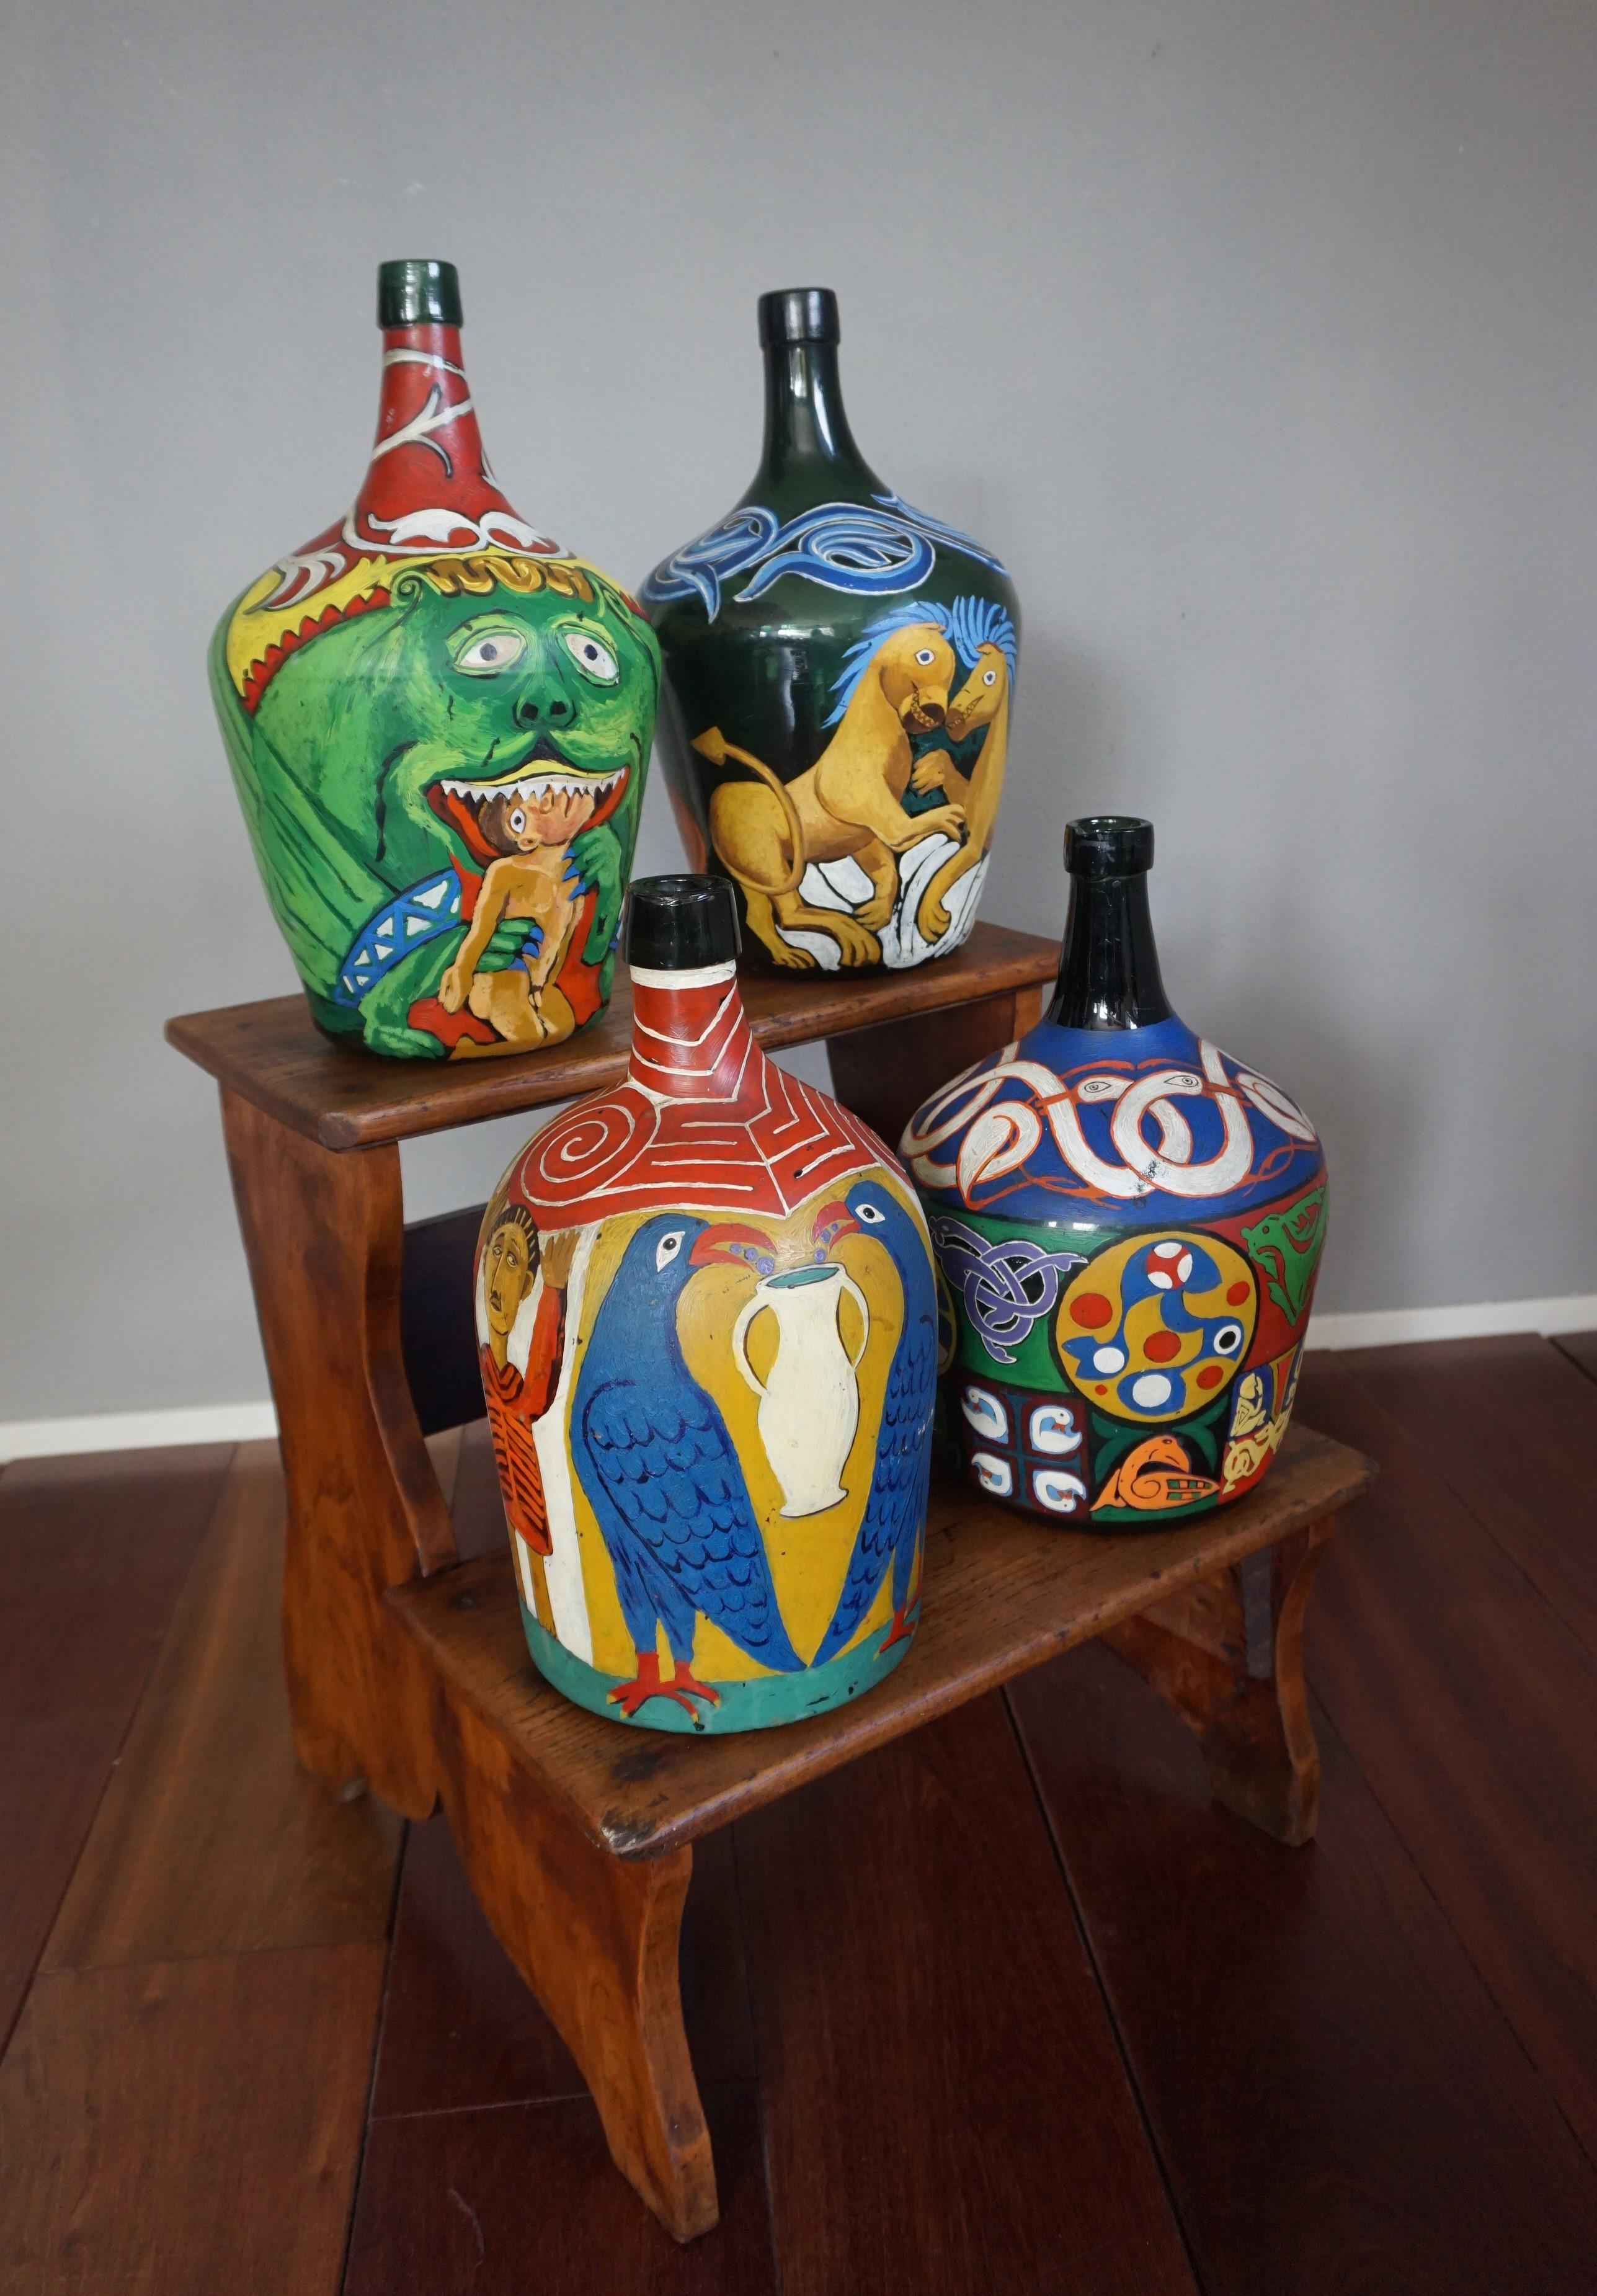 Decorative and Artistic Hand-Painted Bottle Folk Art with Colorful Symbolism For Sale 8